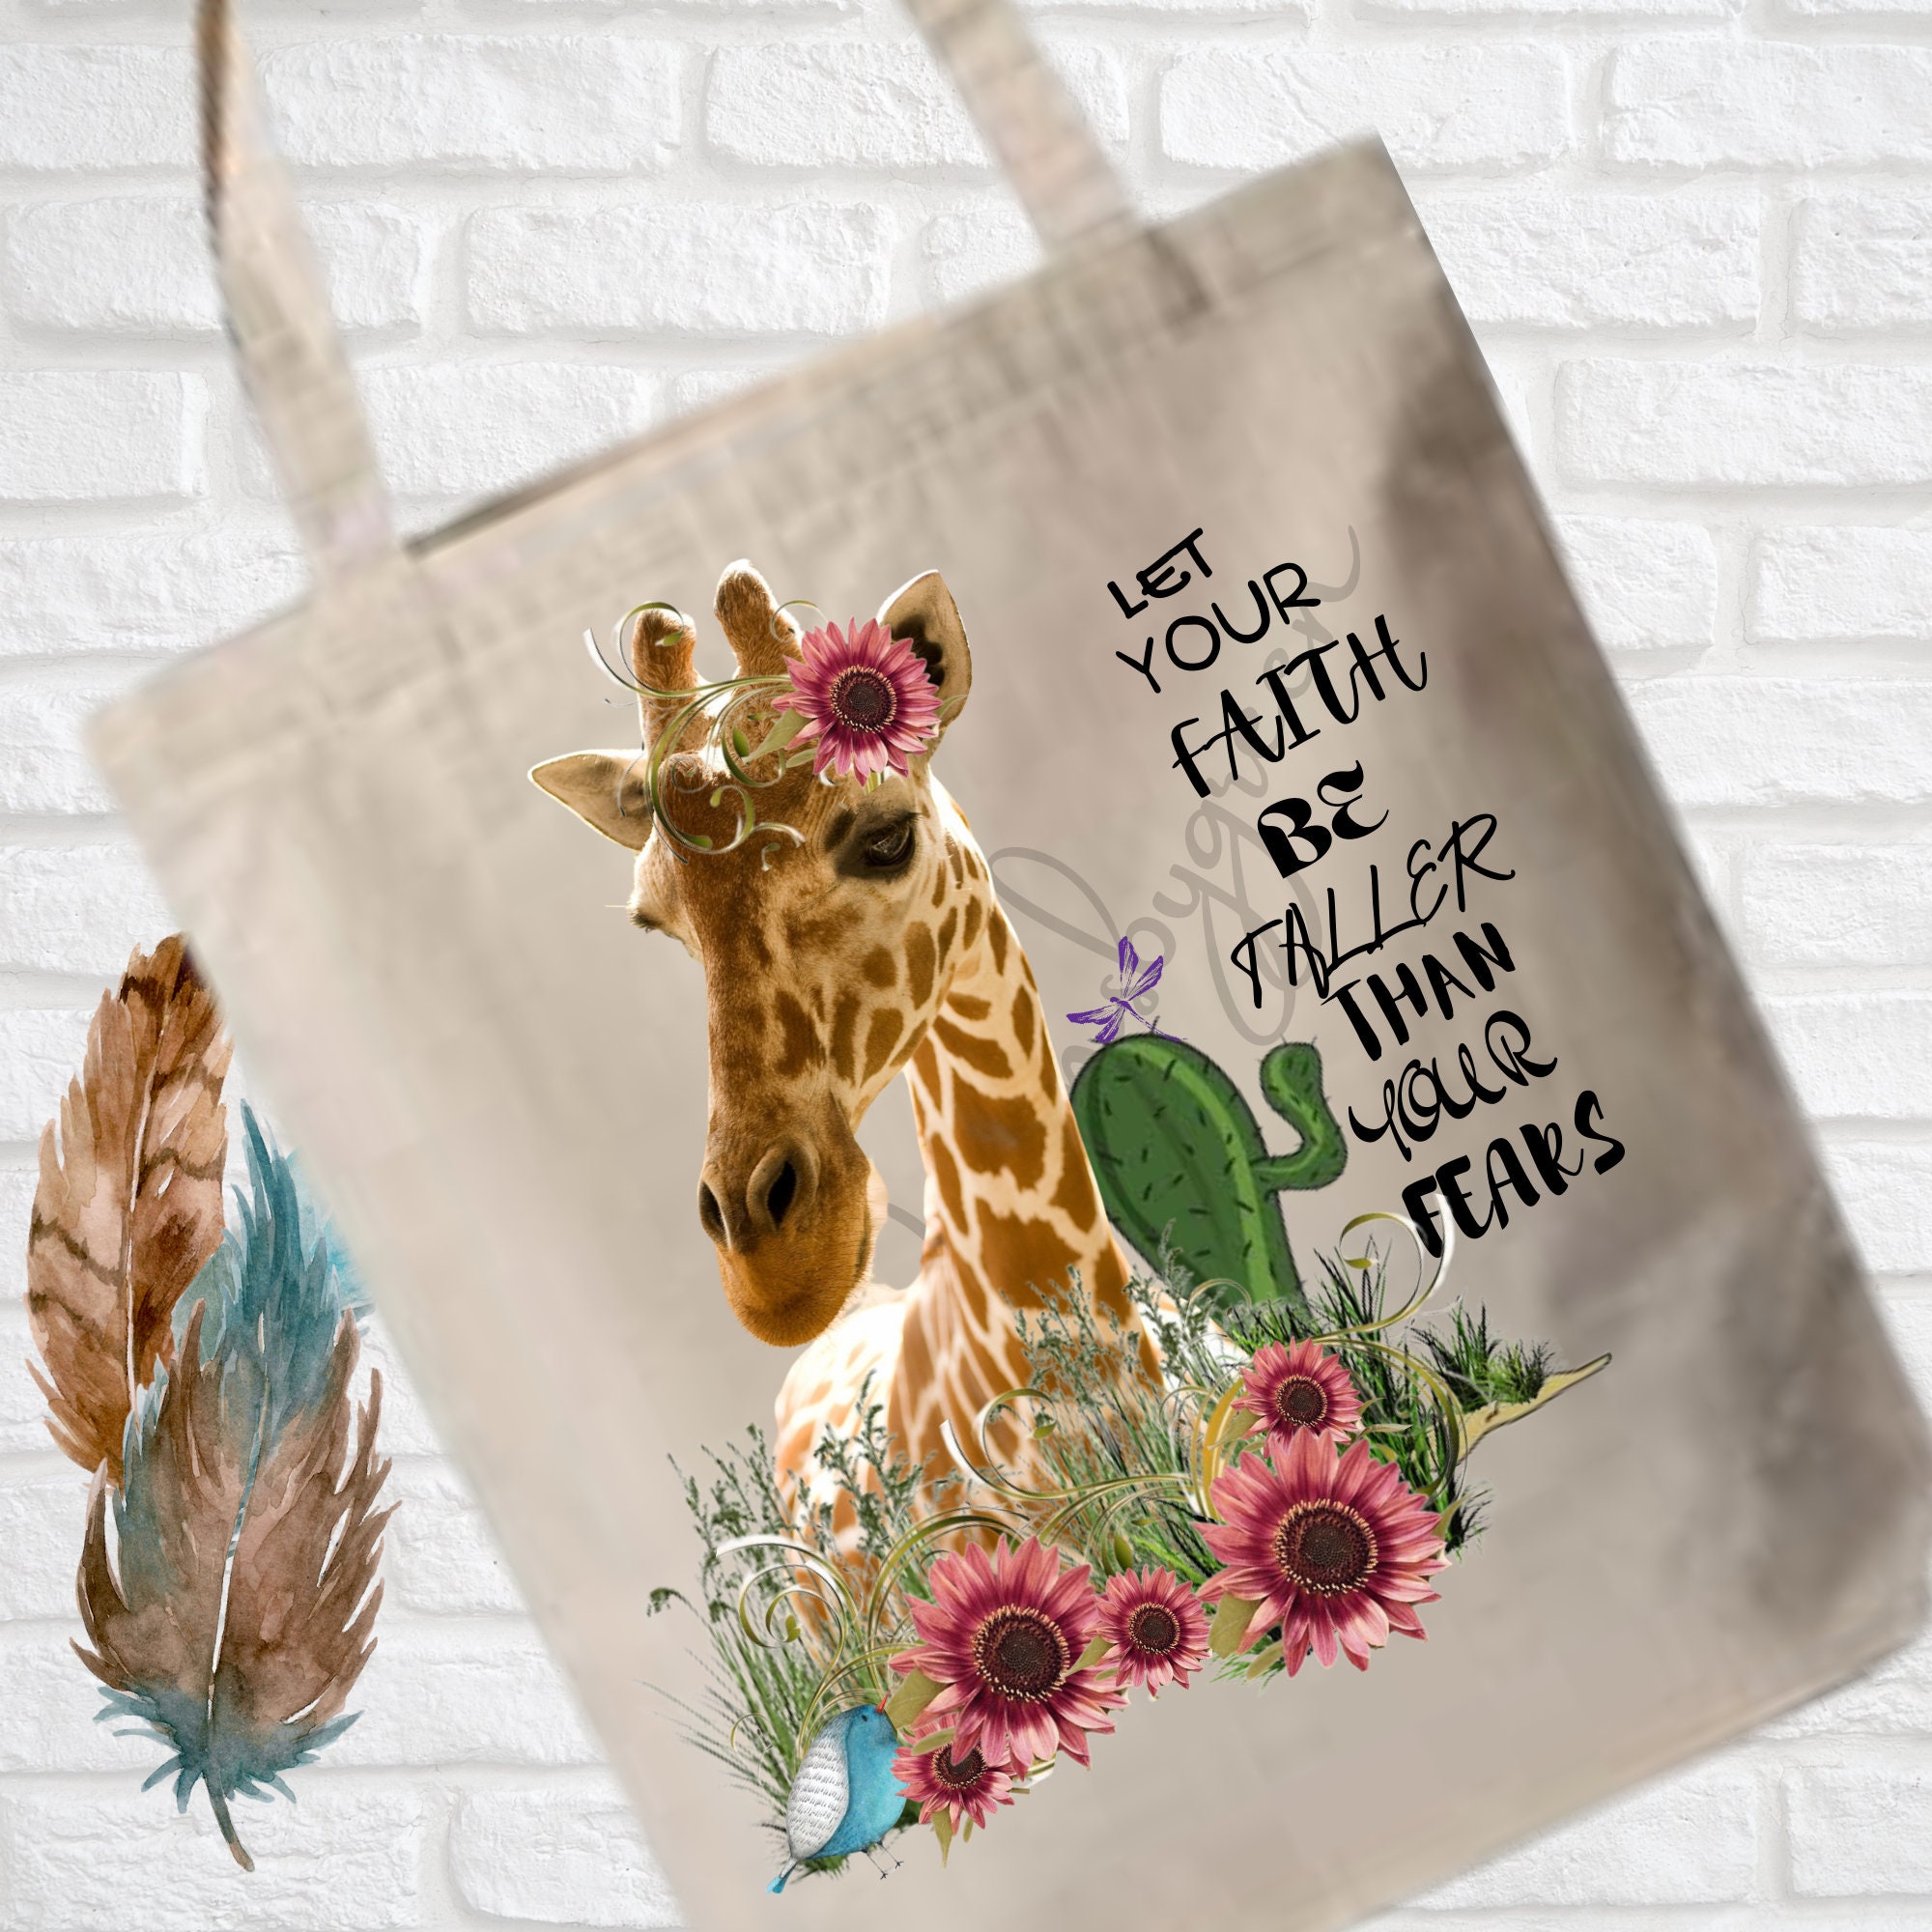 Giraffe PNG image Let your Faith be Taller than your | Etsy